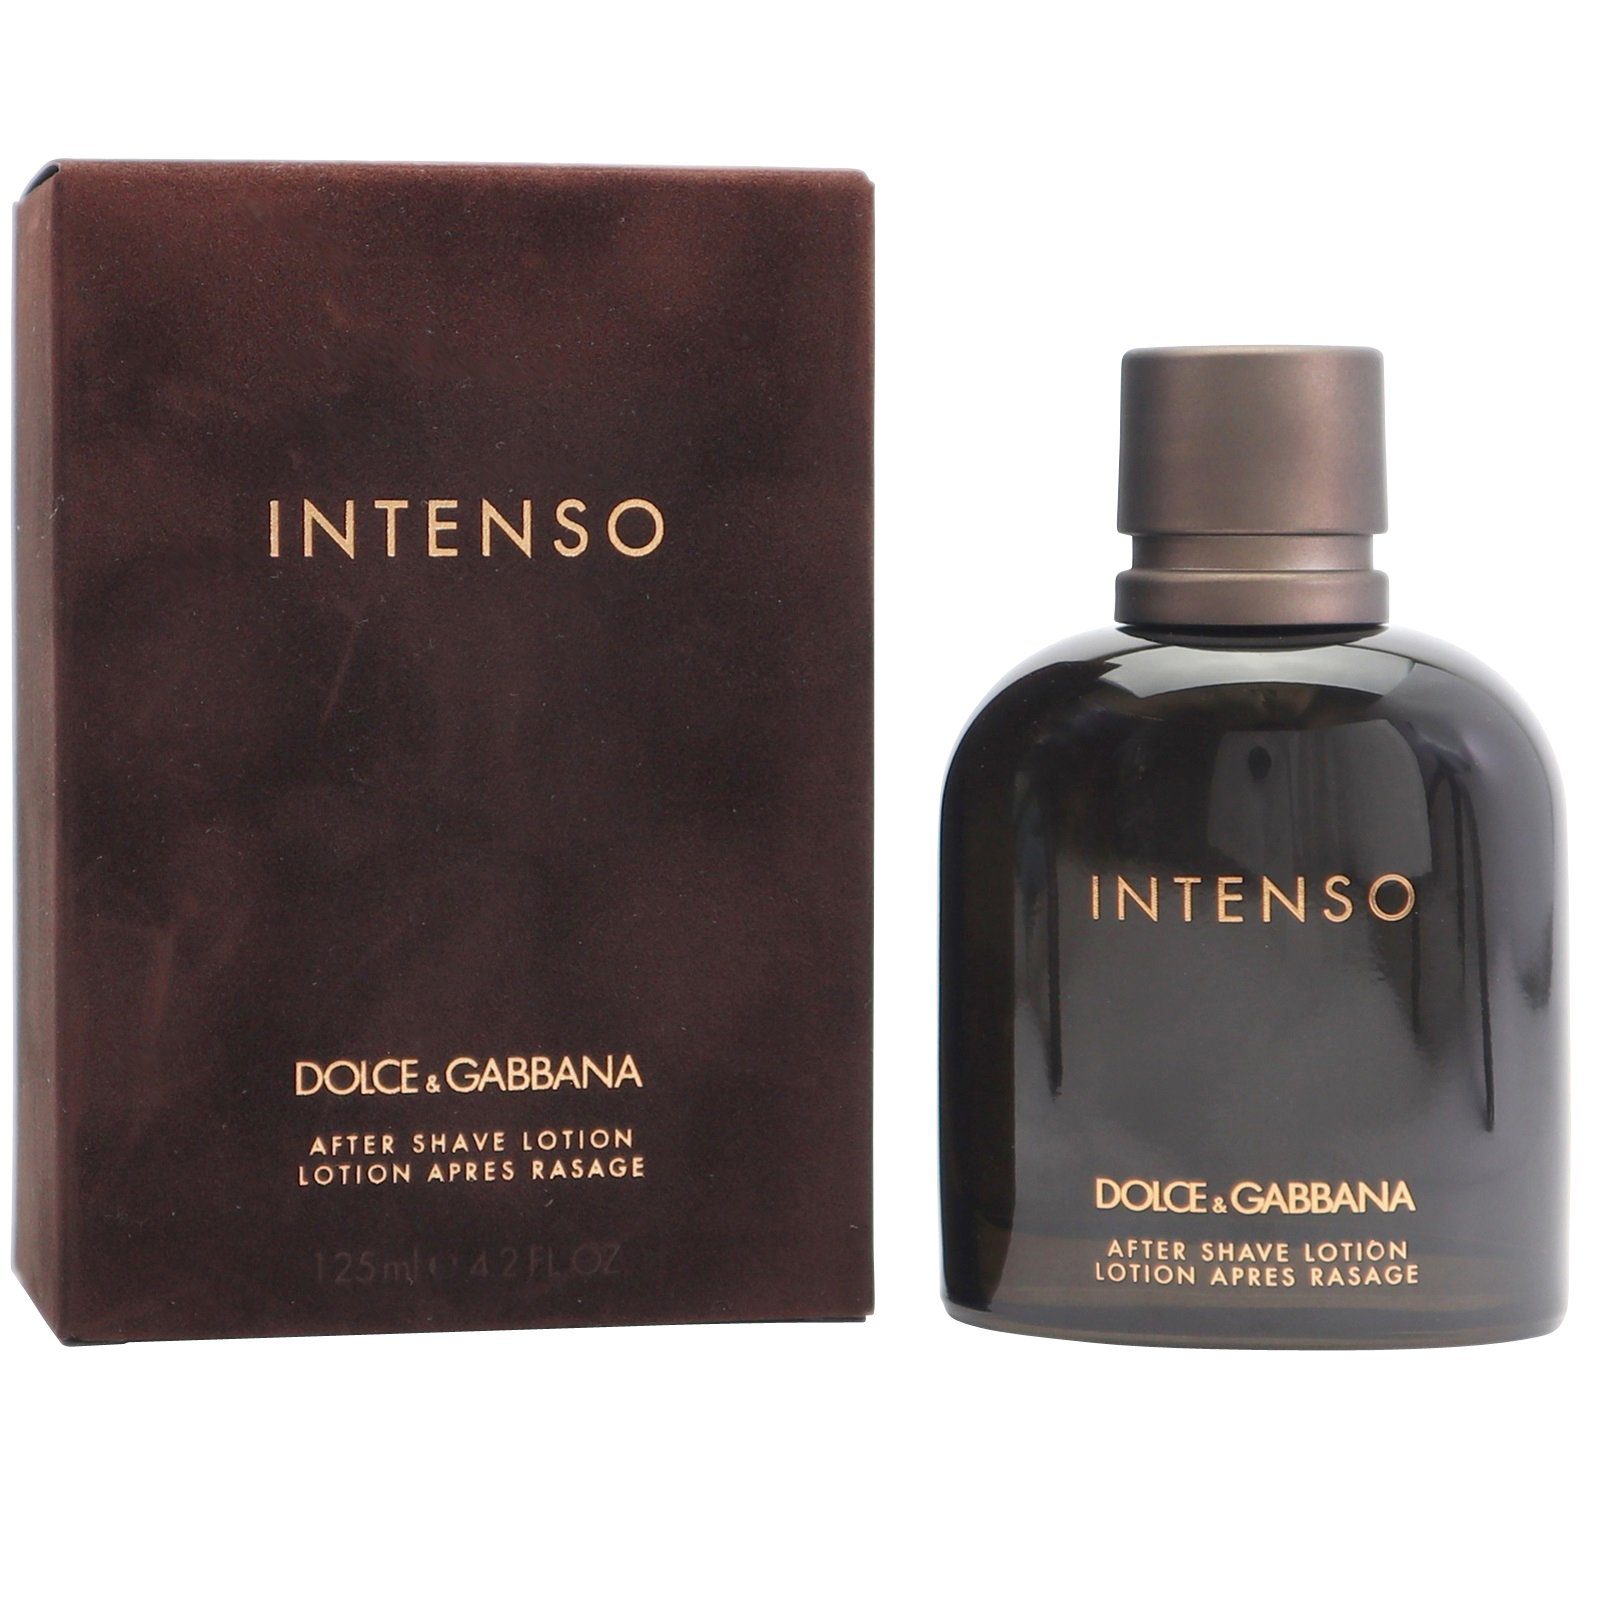 & Intenso DOLCE After Dolce ml After Gabbana Shave Lotion GABBANA & Shave 125 Lotion D&G